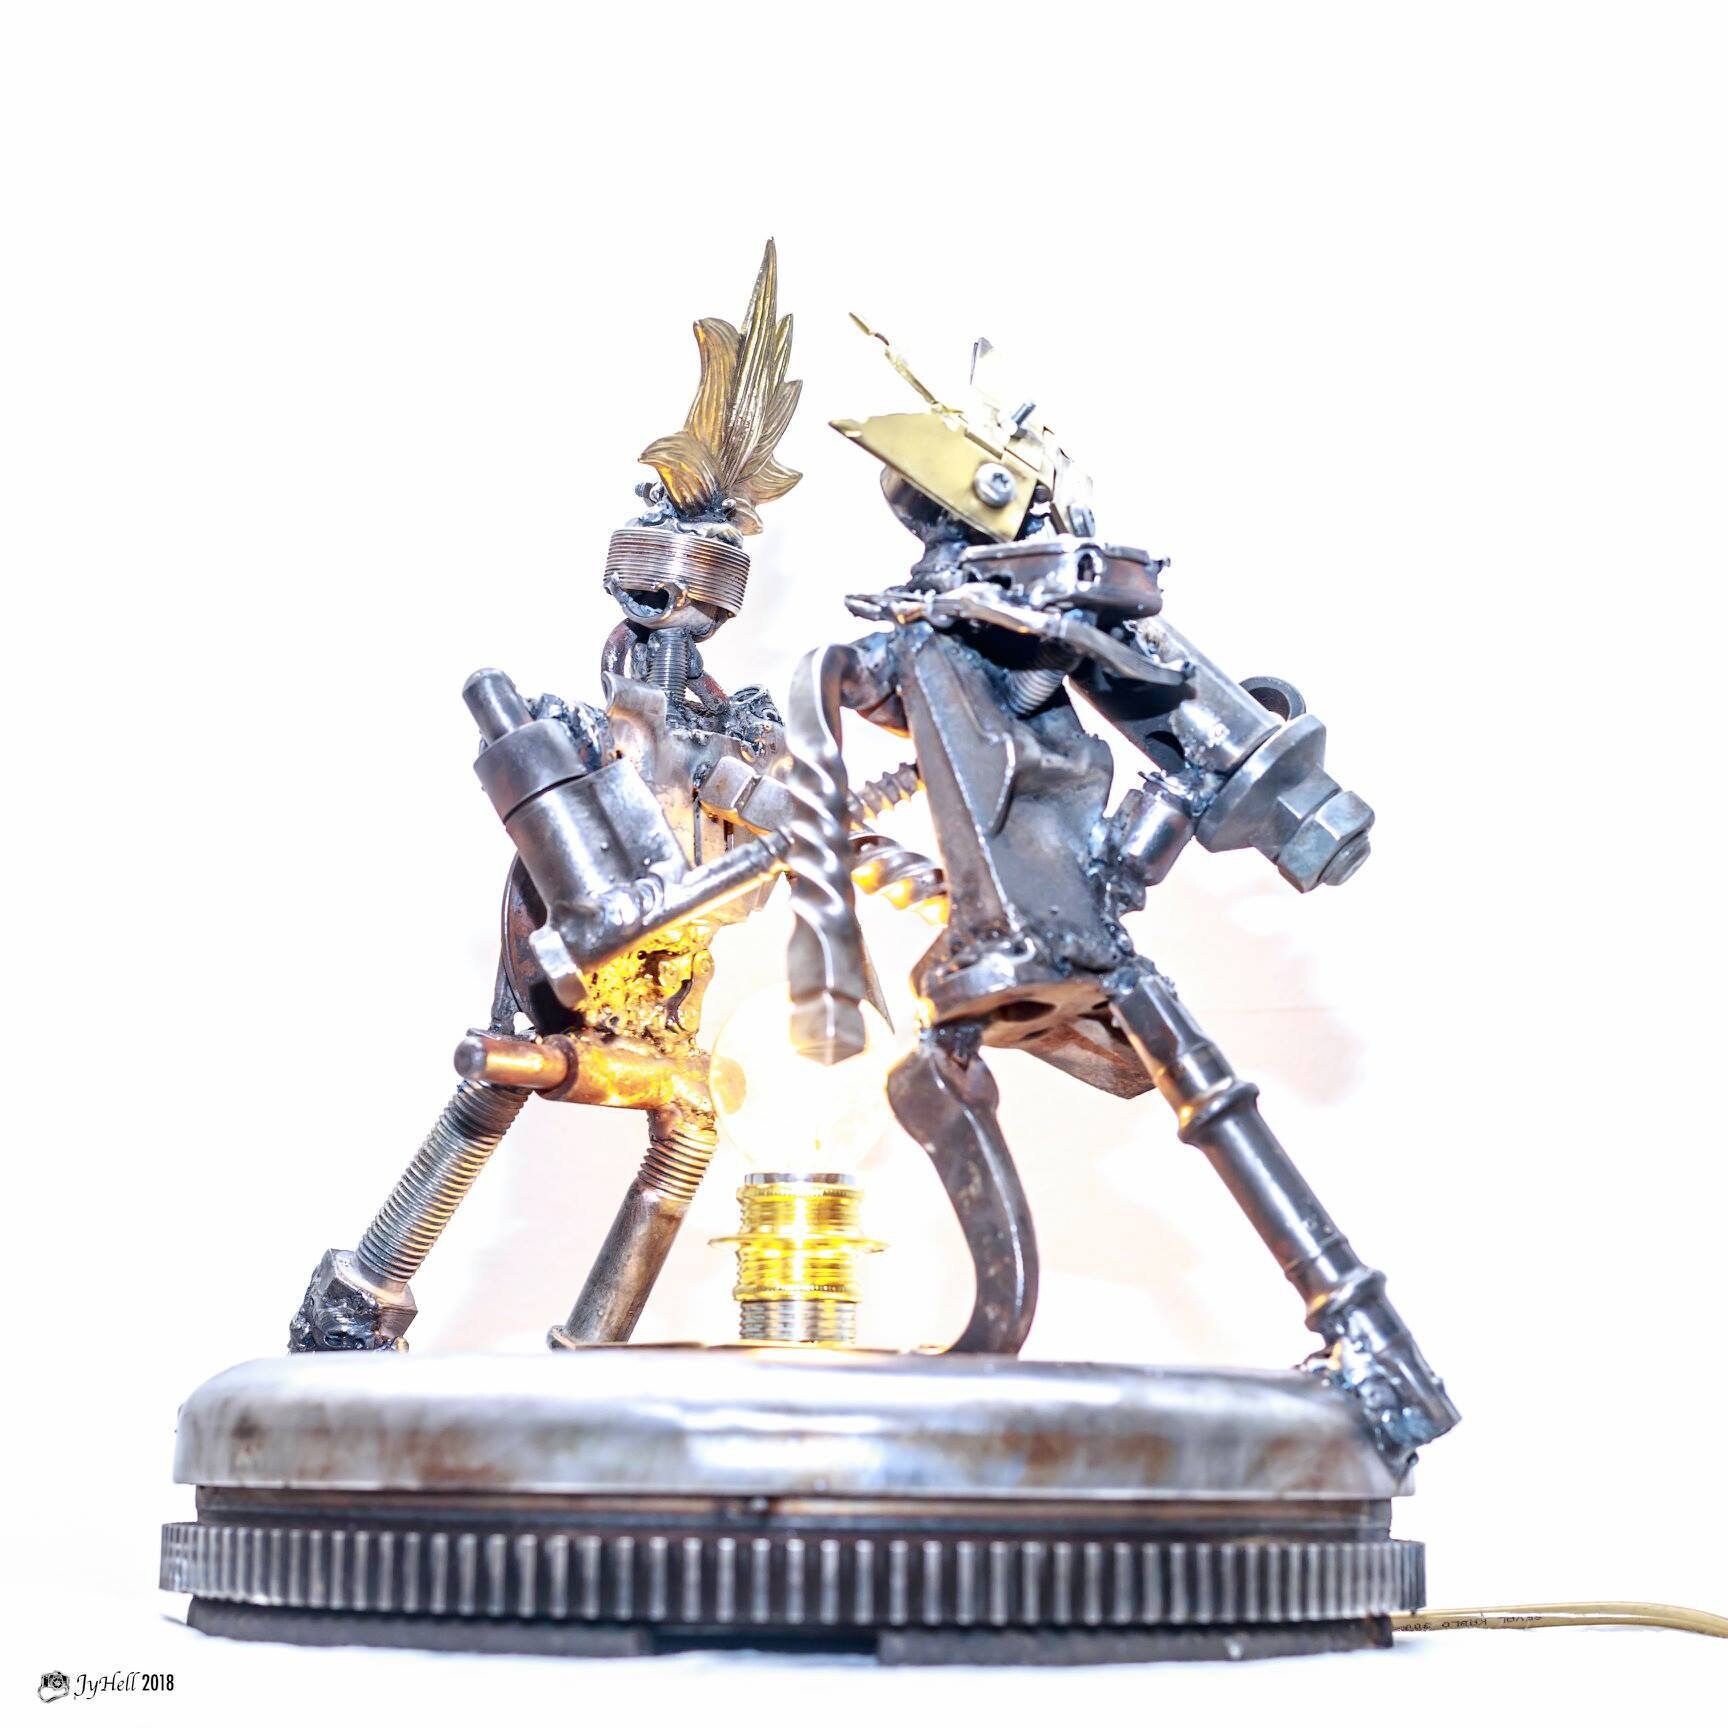 Lampe Industrielle Sangoku Vs Trunk By Recyclhome.